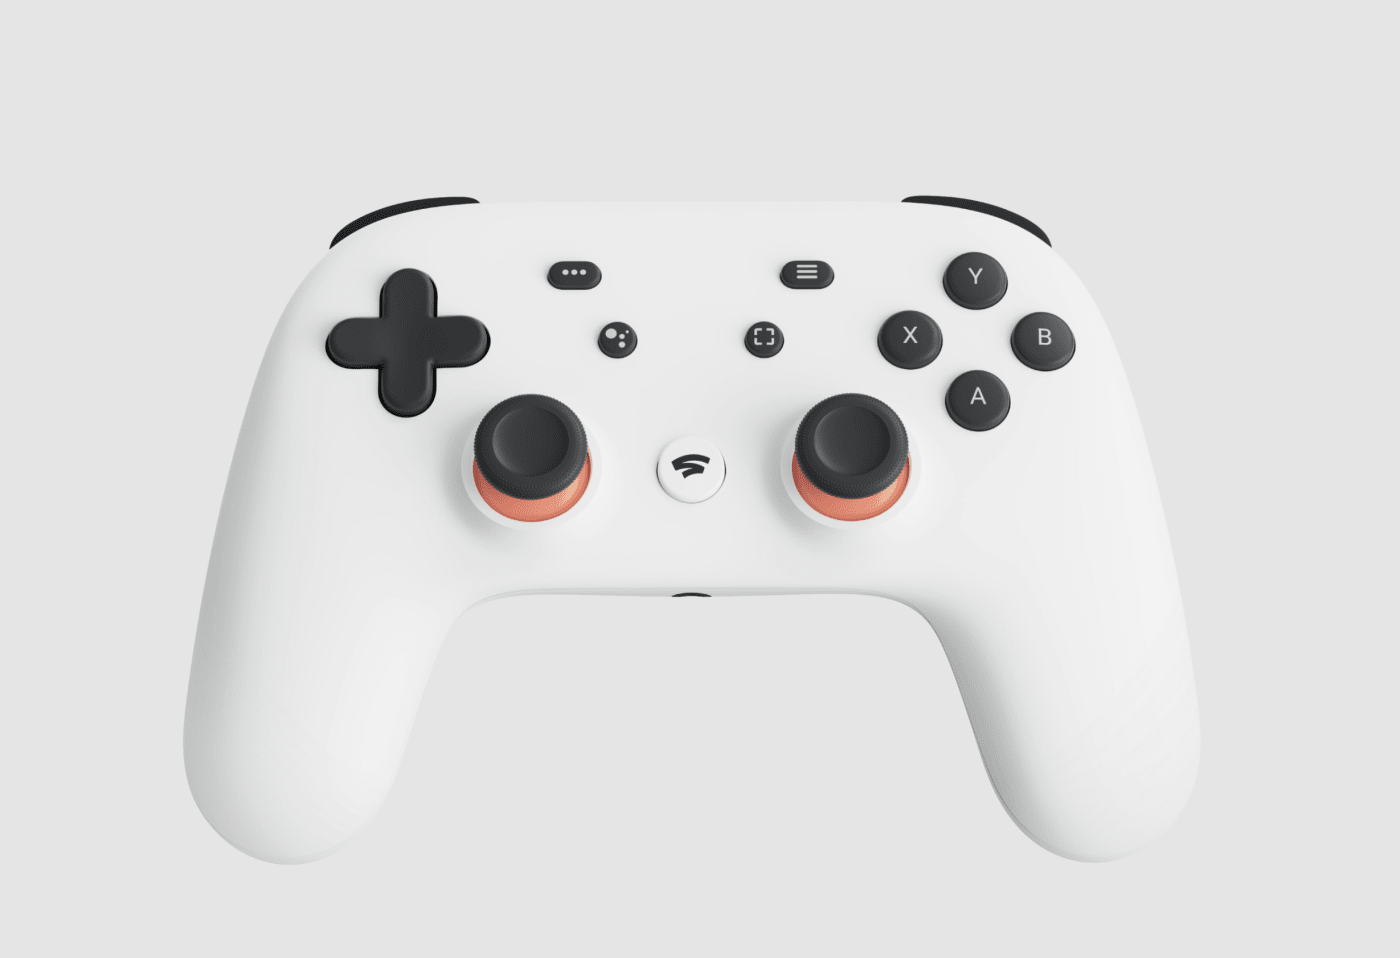 You have an extra full year to convert your Google Stadia controller to Bluetooth